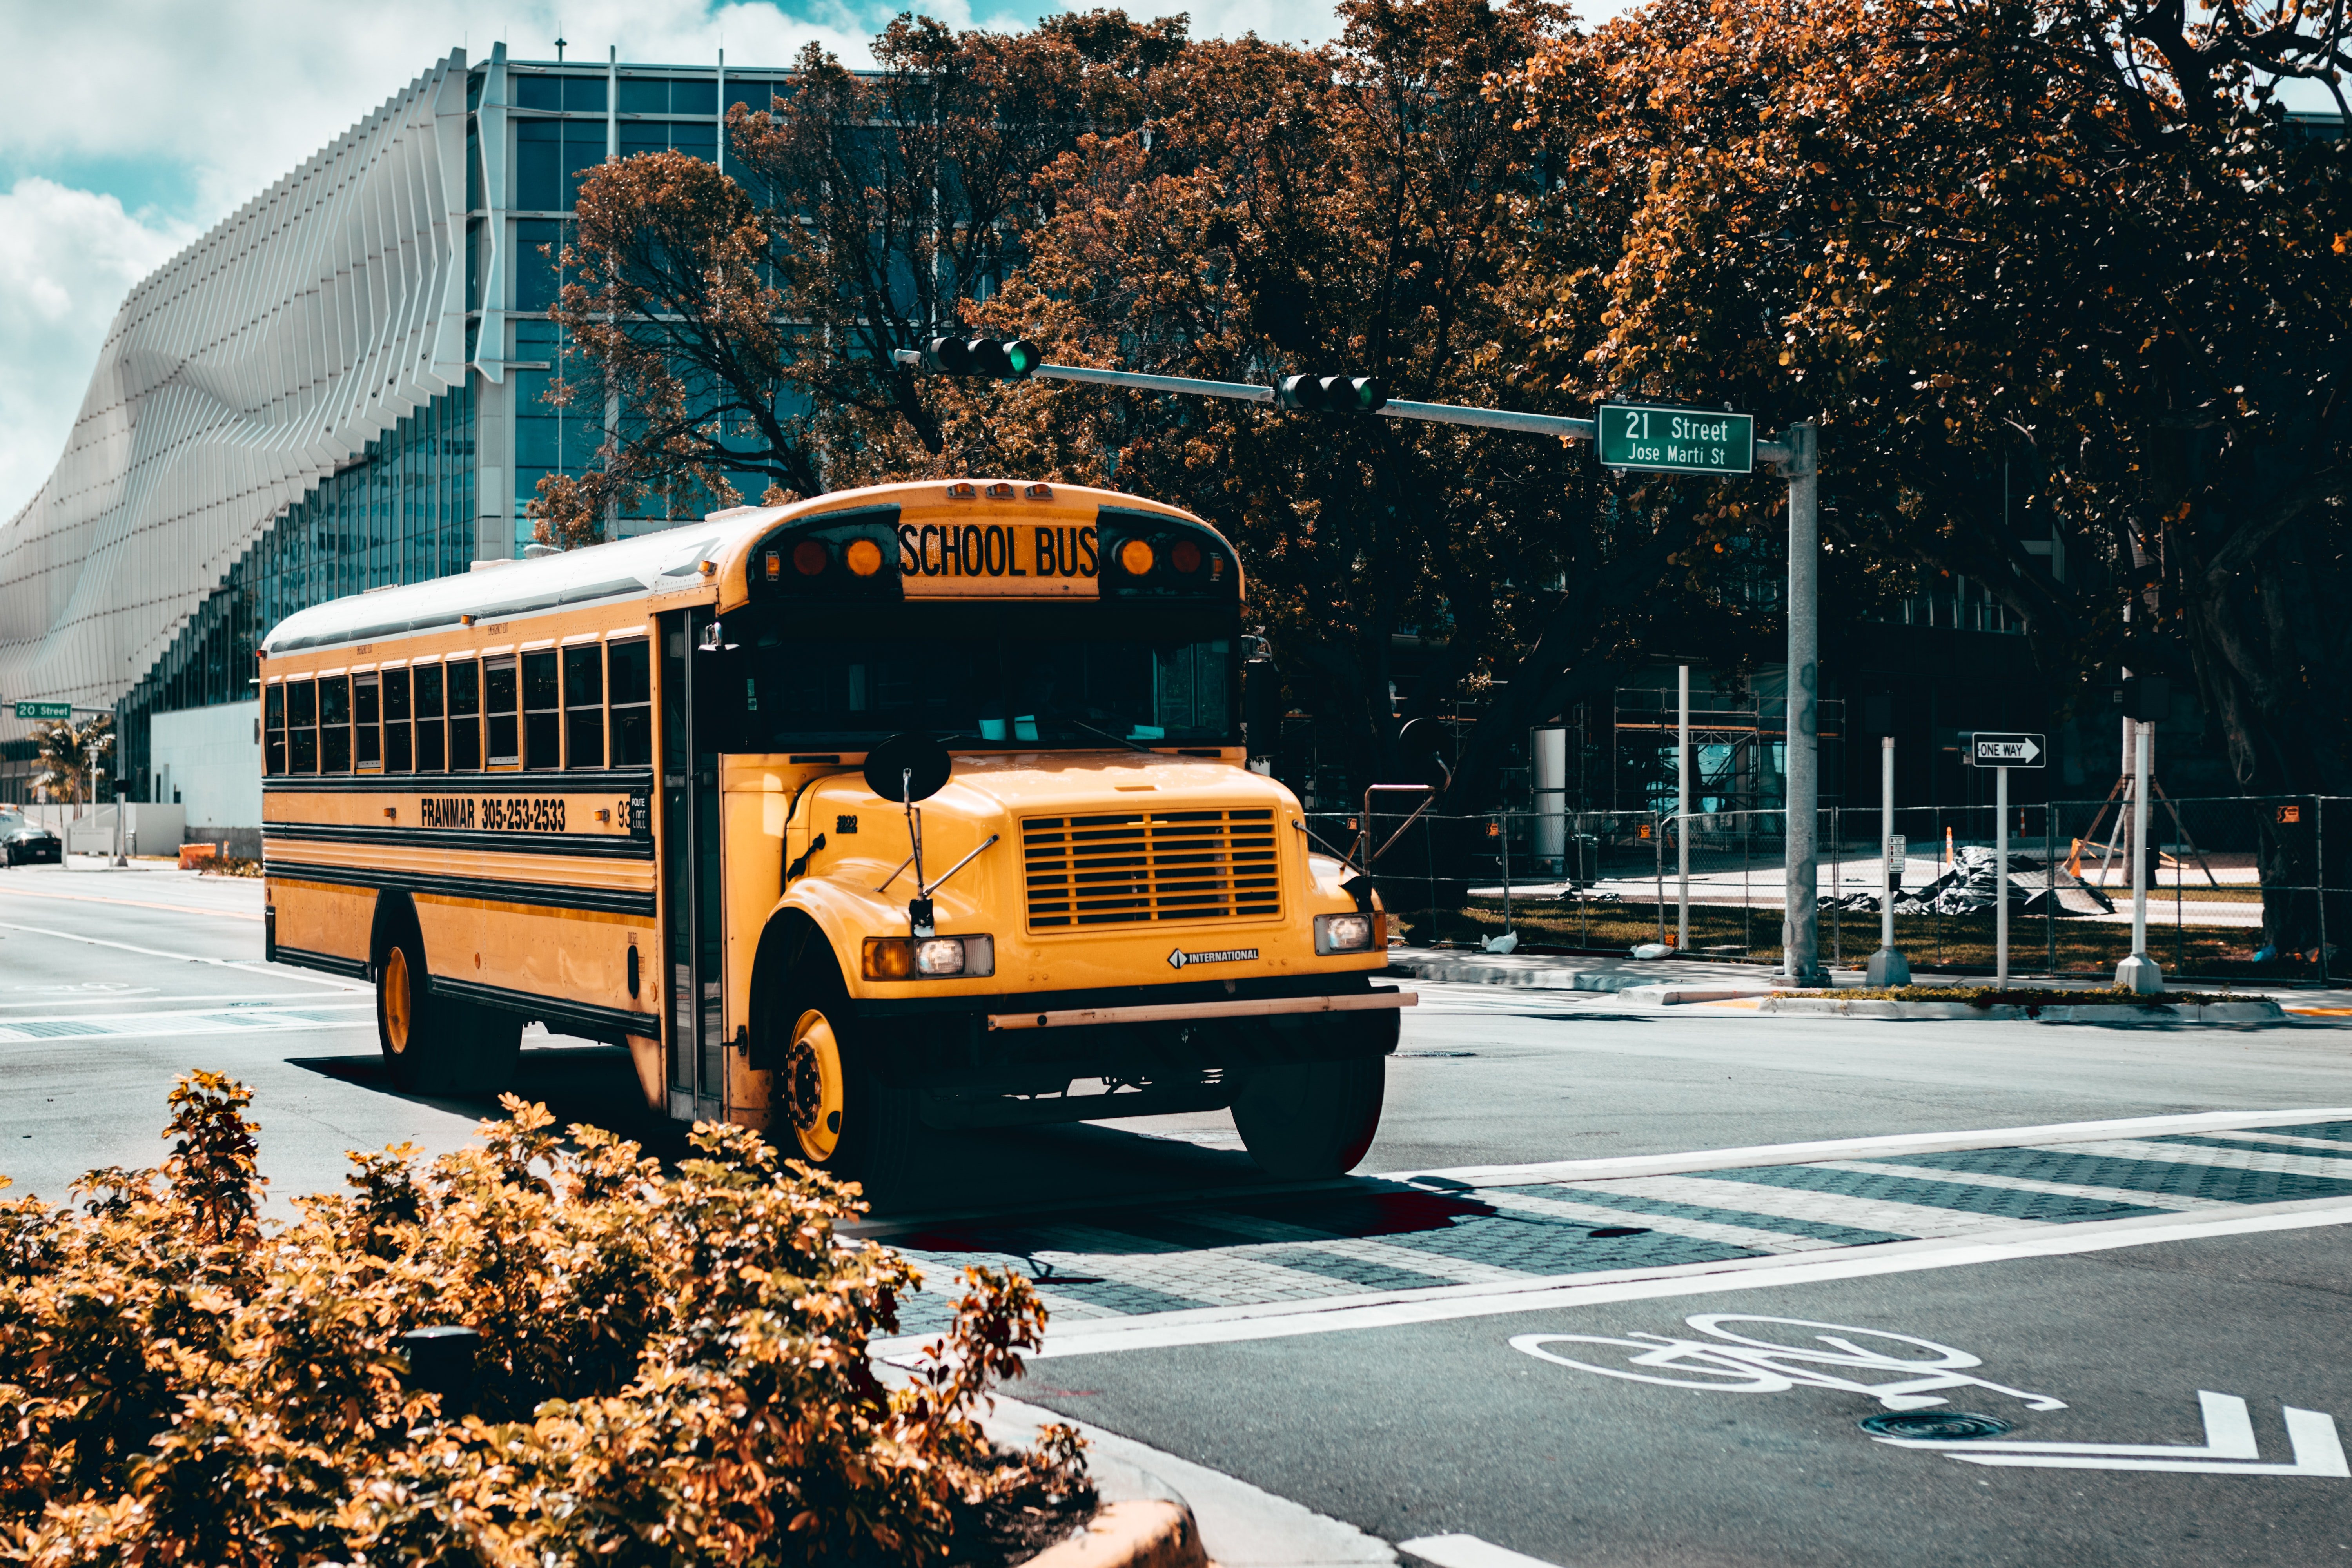 The driver unexpectedly halted the bus in the middle of the street & furiously looked at OP's bullies. | Source: Unsplash